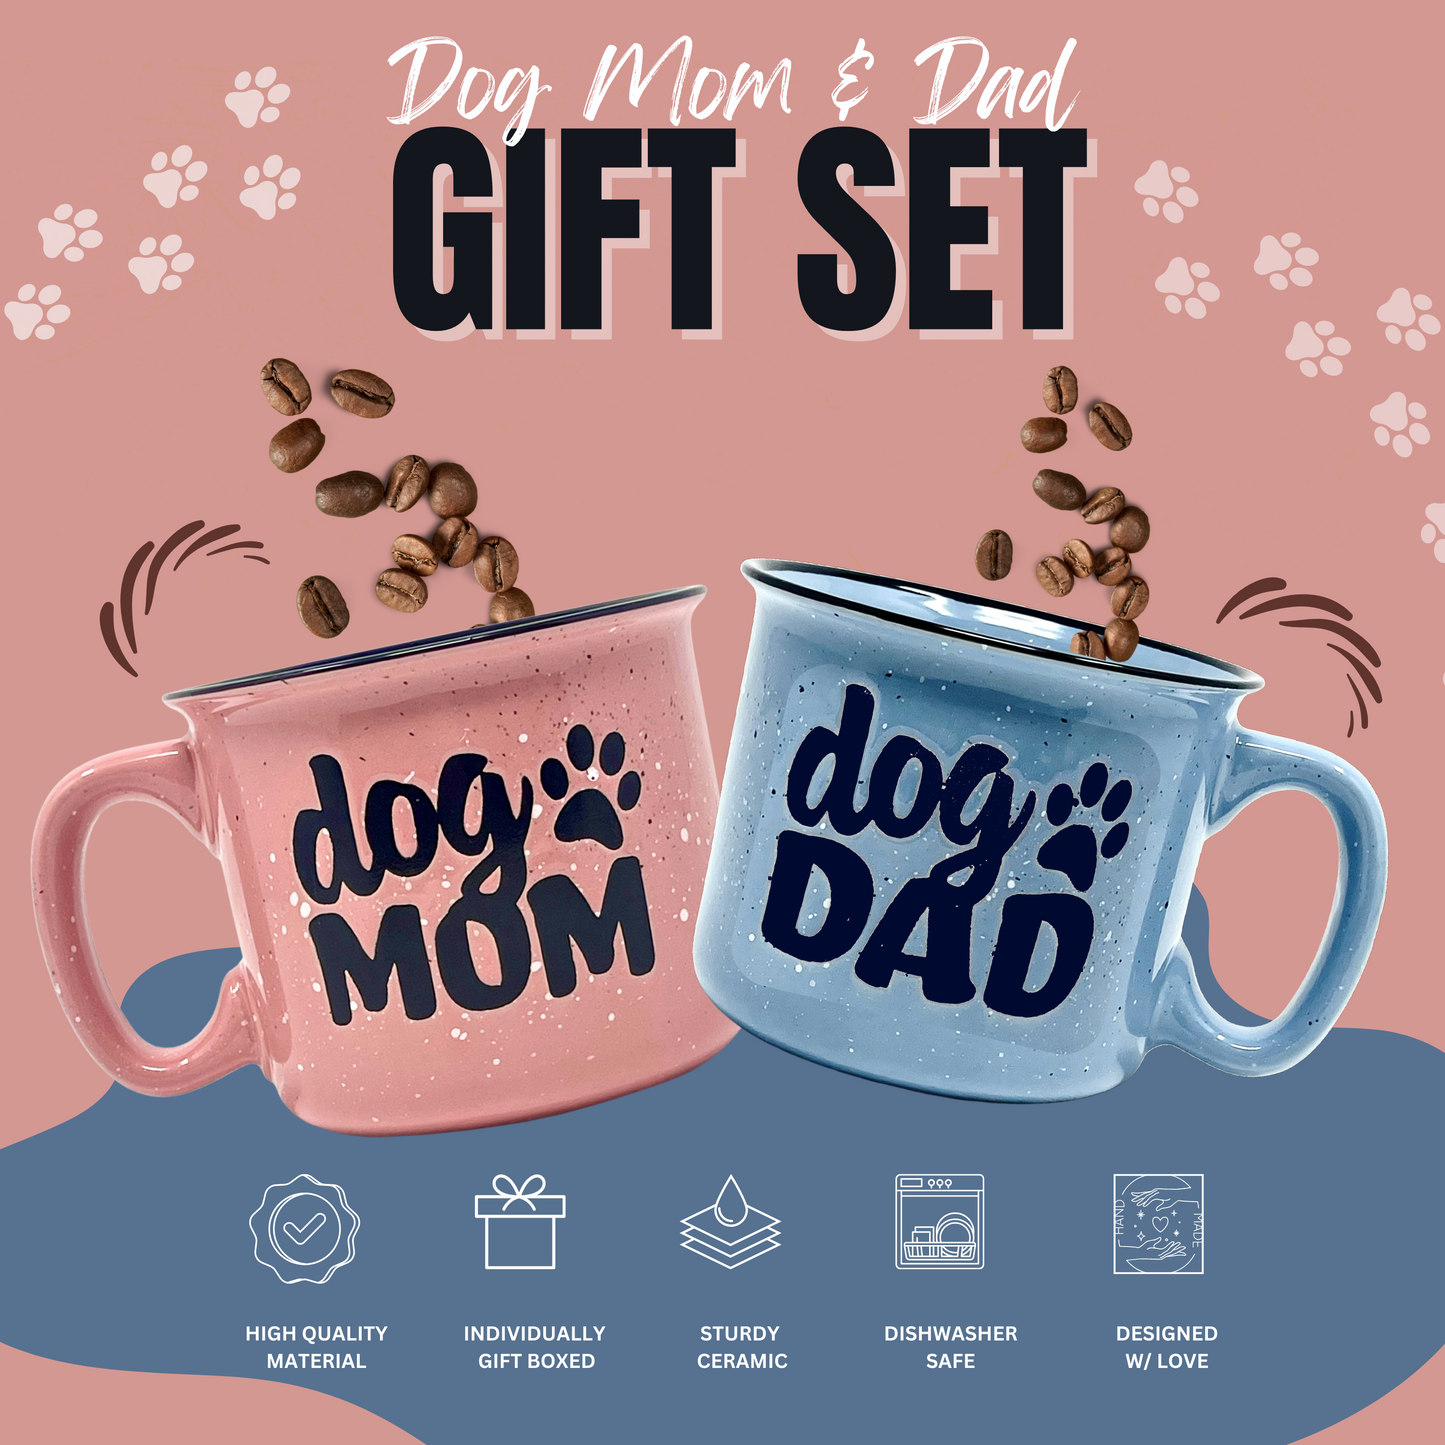 Cute Funny Coffee Mug for Dog Lovers - Dog Mom, Dog Dad, Fur Mama - Unique Fun Gifts for Her, Dad, Mom, Sister, Teacher, Coworkers - Coffee Cups & Mugs with Quotes (Dog Mom and Dog Dad Mug Gift Set)